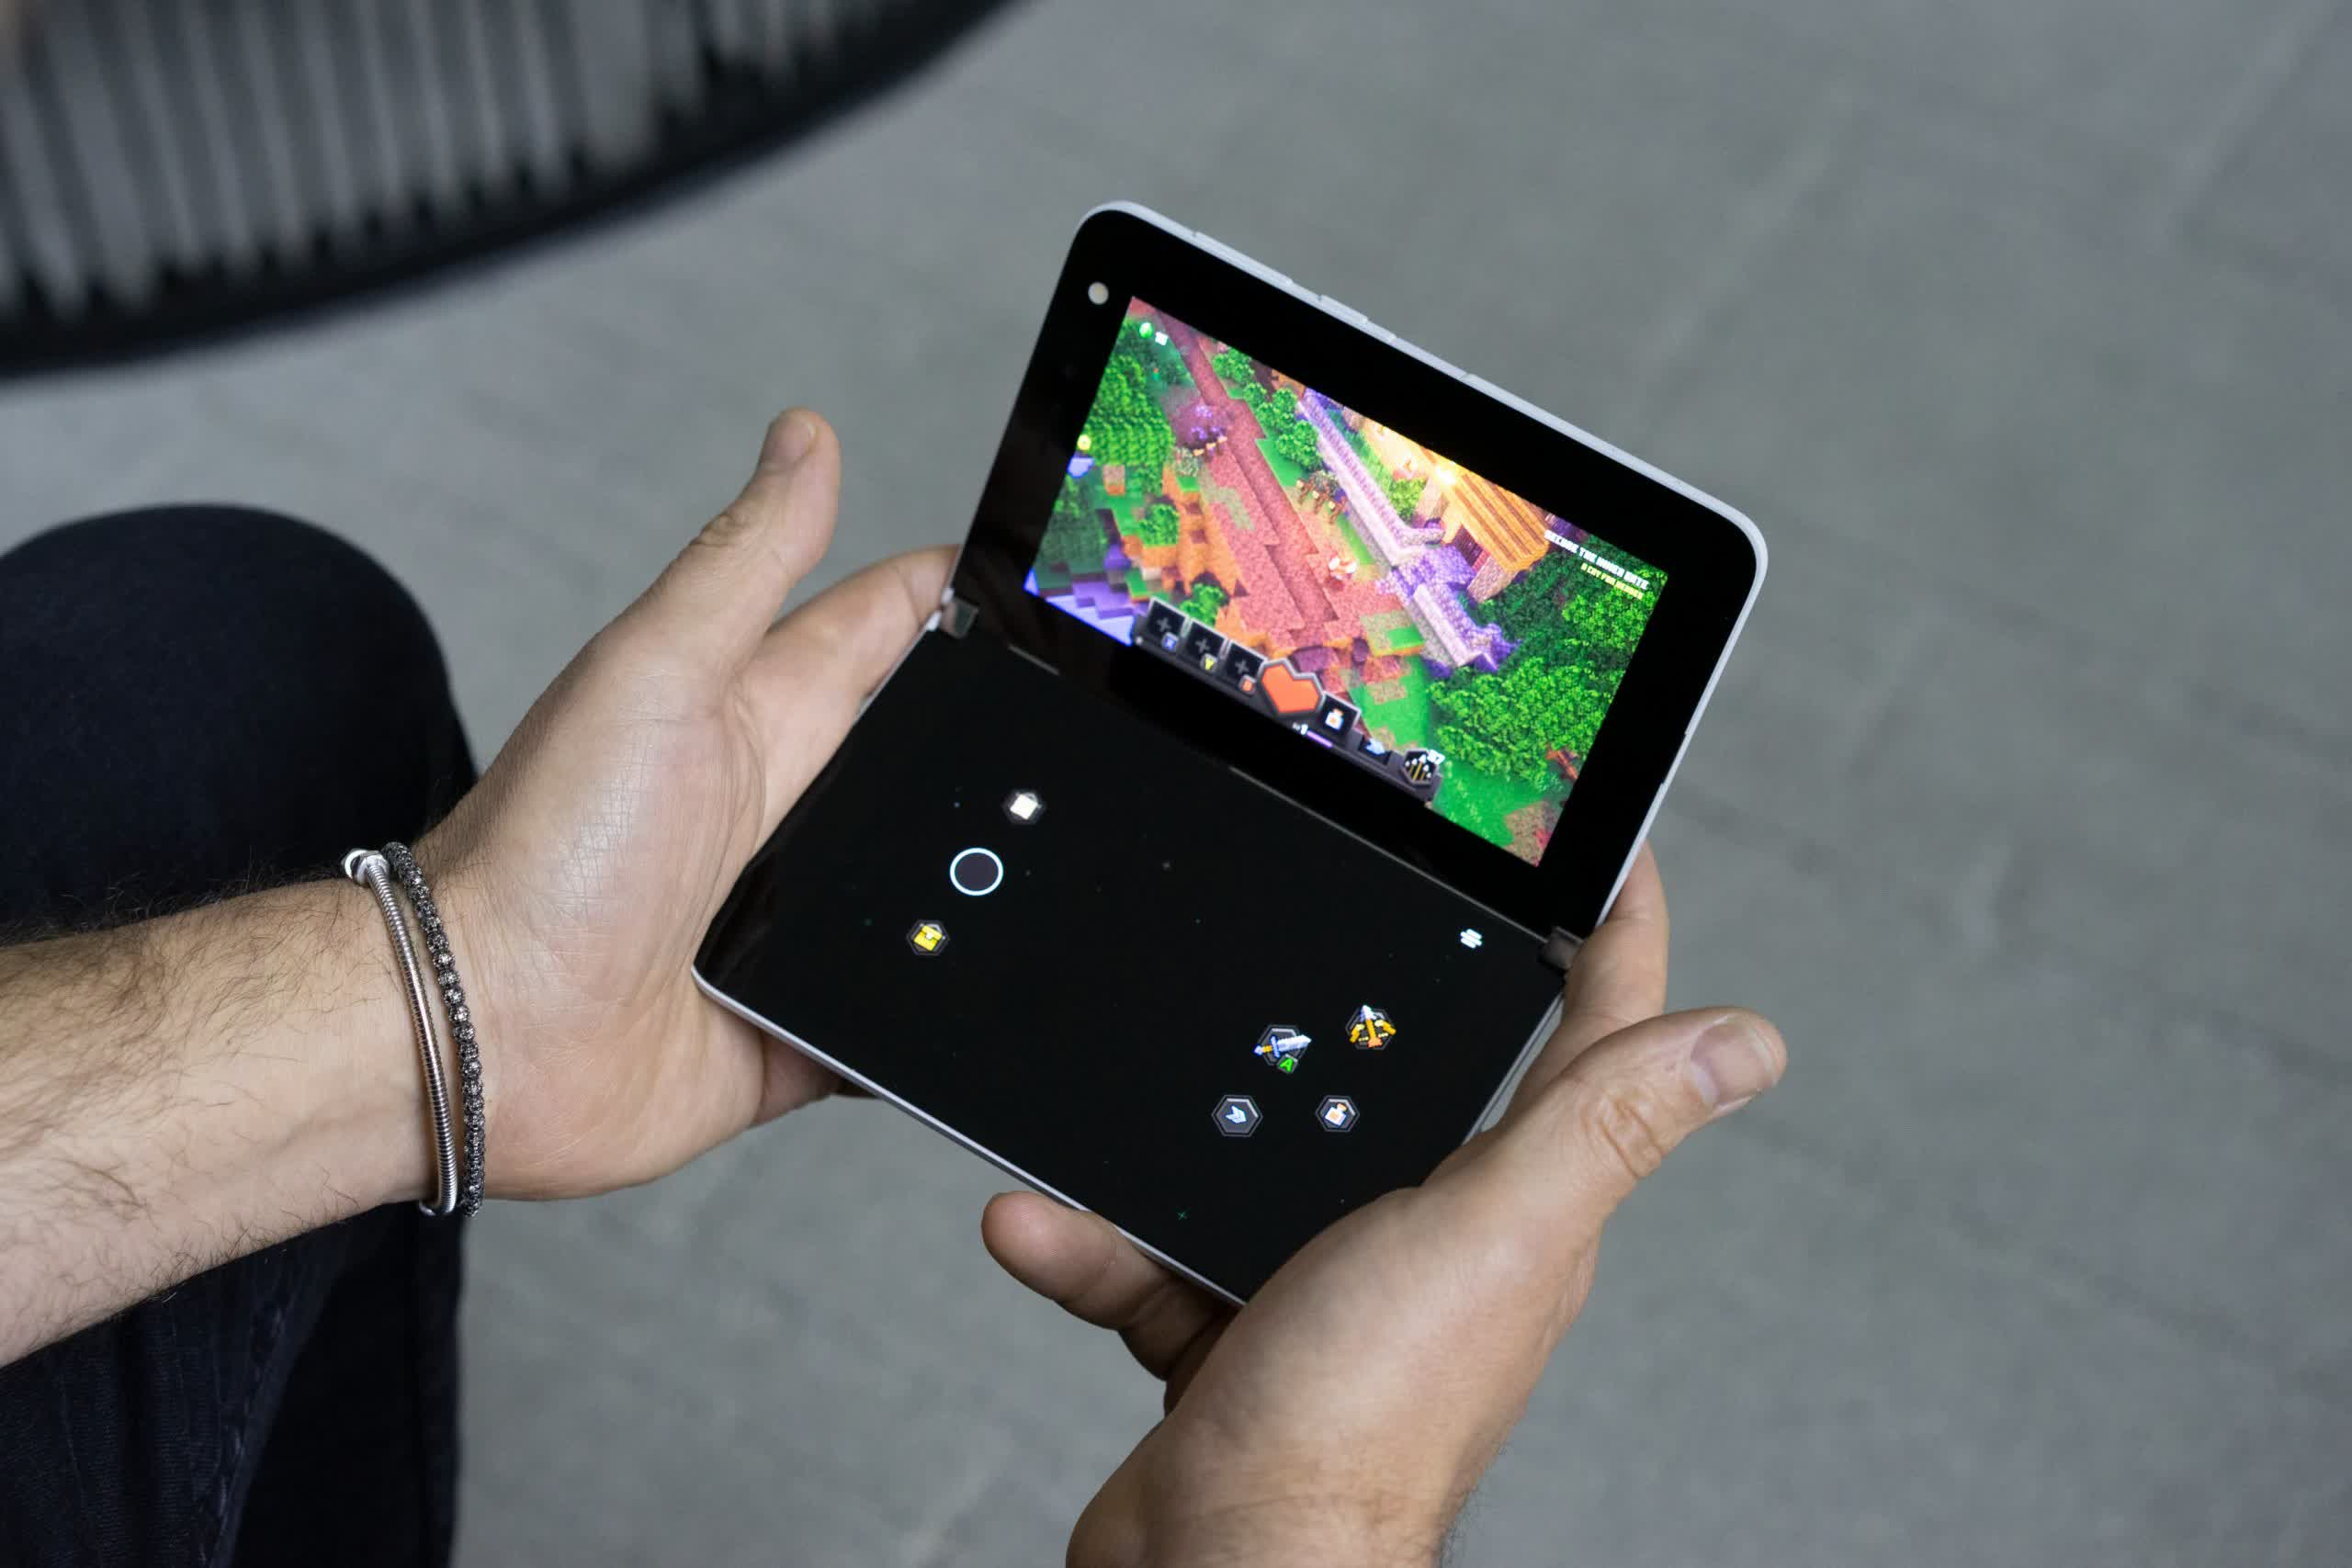 Microsoft has turned the Surface Duo into a handheld Xbox